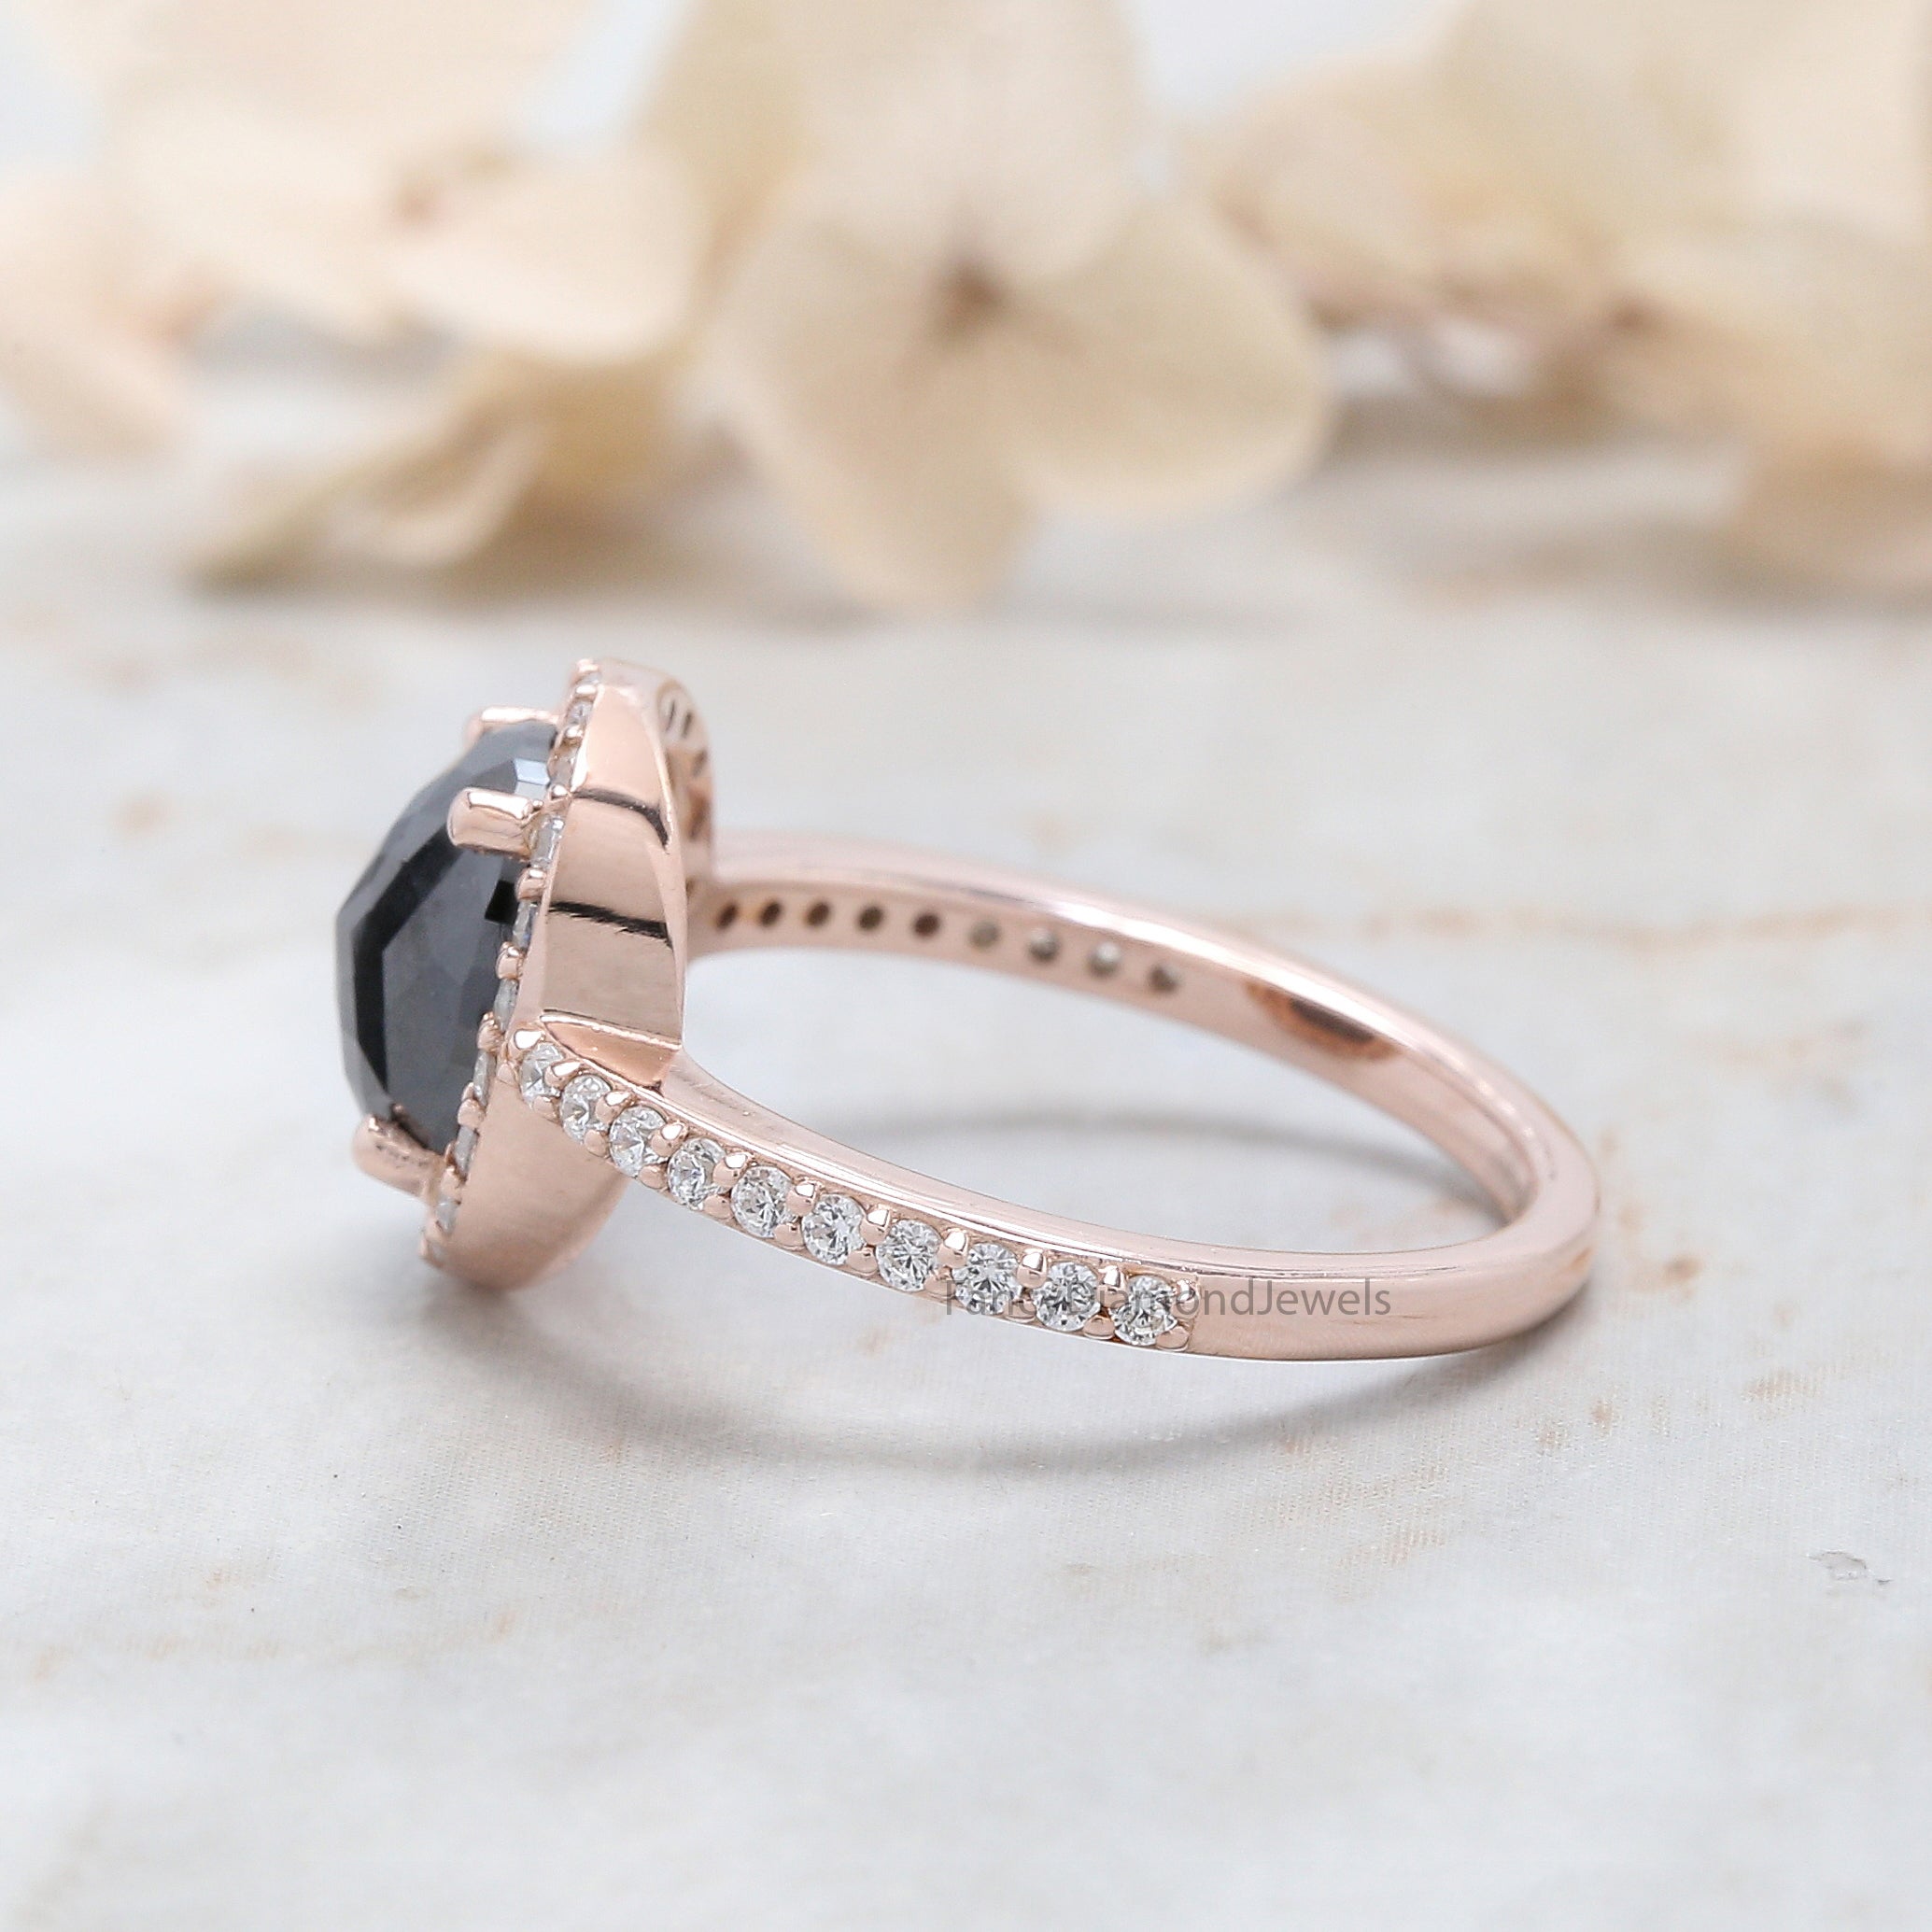 Cushion Shape Black Color Diamond Ring 2.21 Ct 8.30 MM Cushion Diamond Ring 14K Solid Rose Gold Silver Engagement Ring Gift For Her QL3068